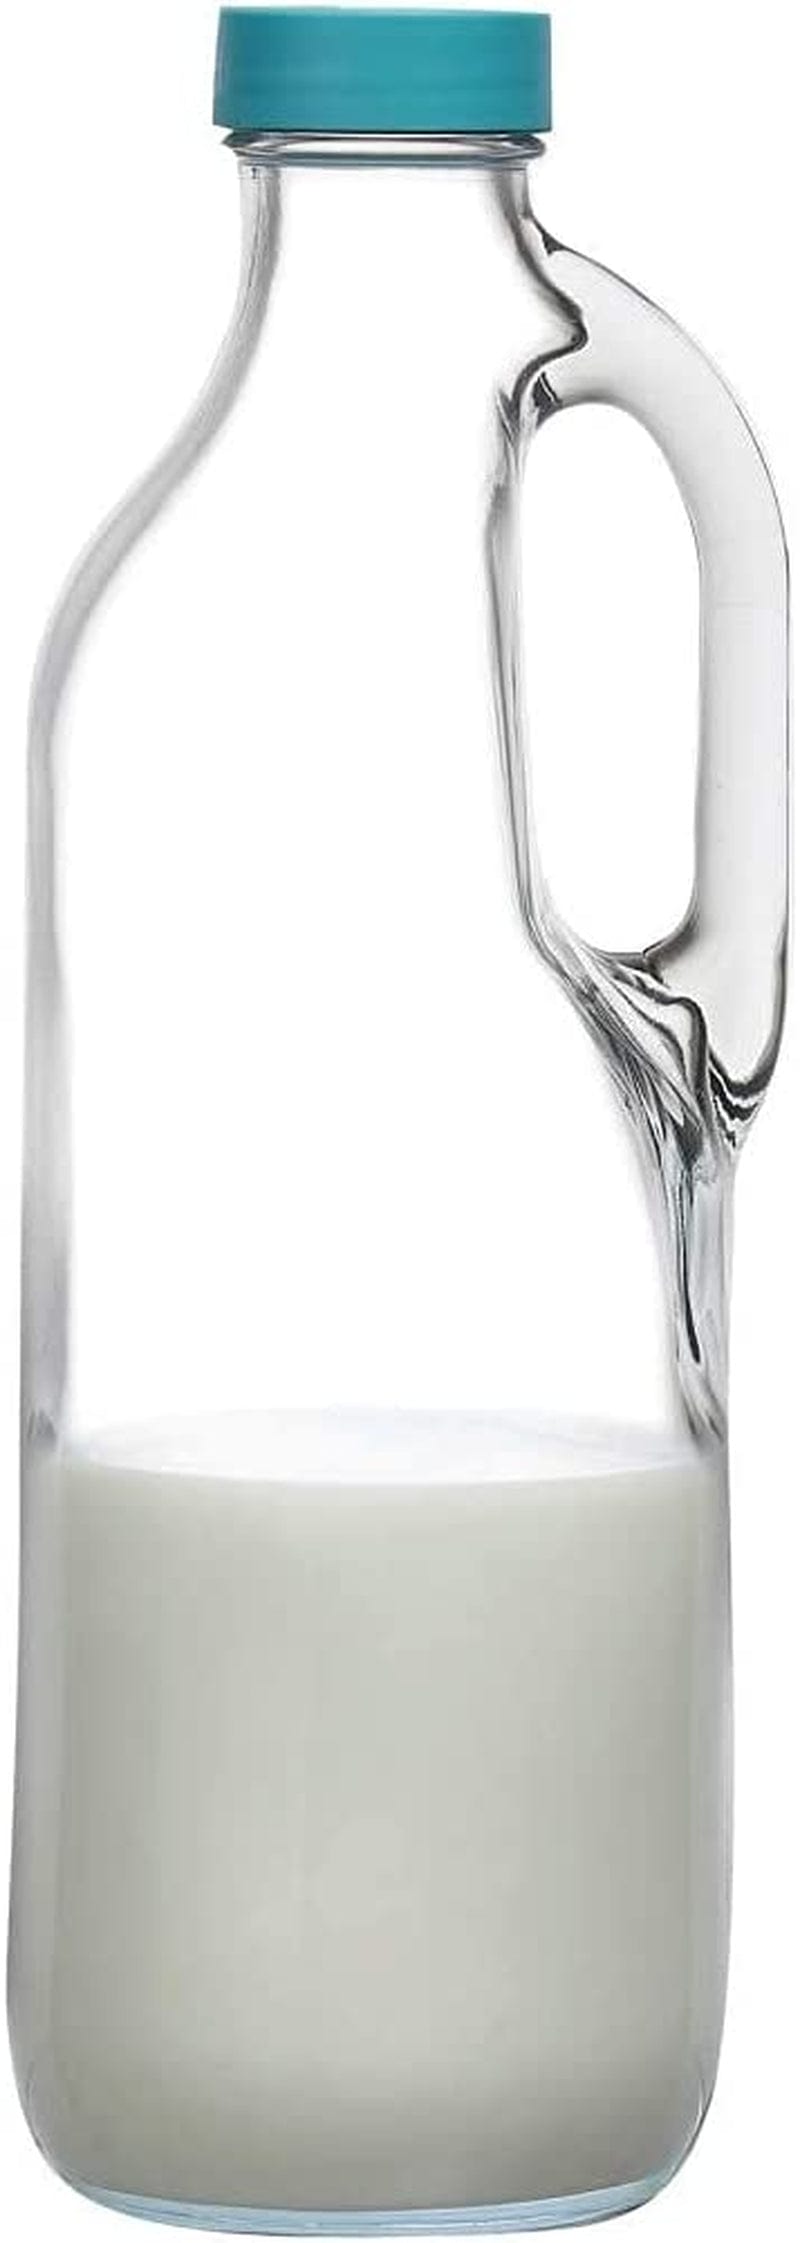 2 Pc 47Oz Clear Glass Milk Bottles Set with Handle and Lids - Airtight Milk Container for Refrigerator Jug Glass Water Pitchers Water Juice Heavy Milk Bottle Liquid Containers for Kitchen Home & Garden > Decor > Decorative Jars GLASS MONGER   